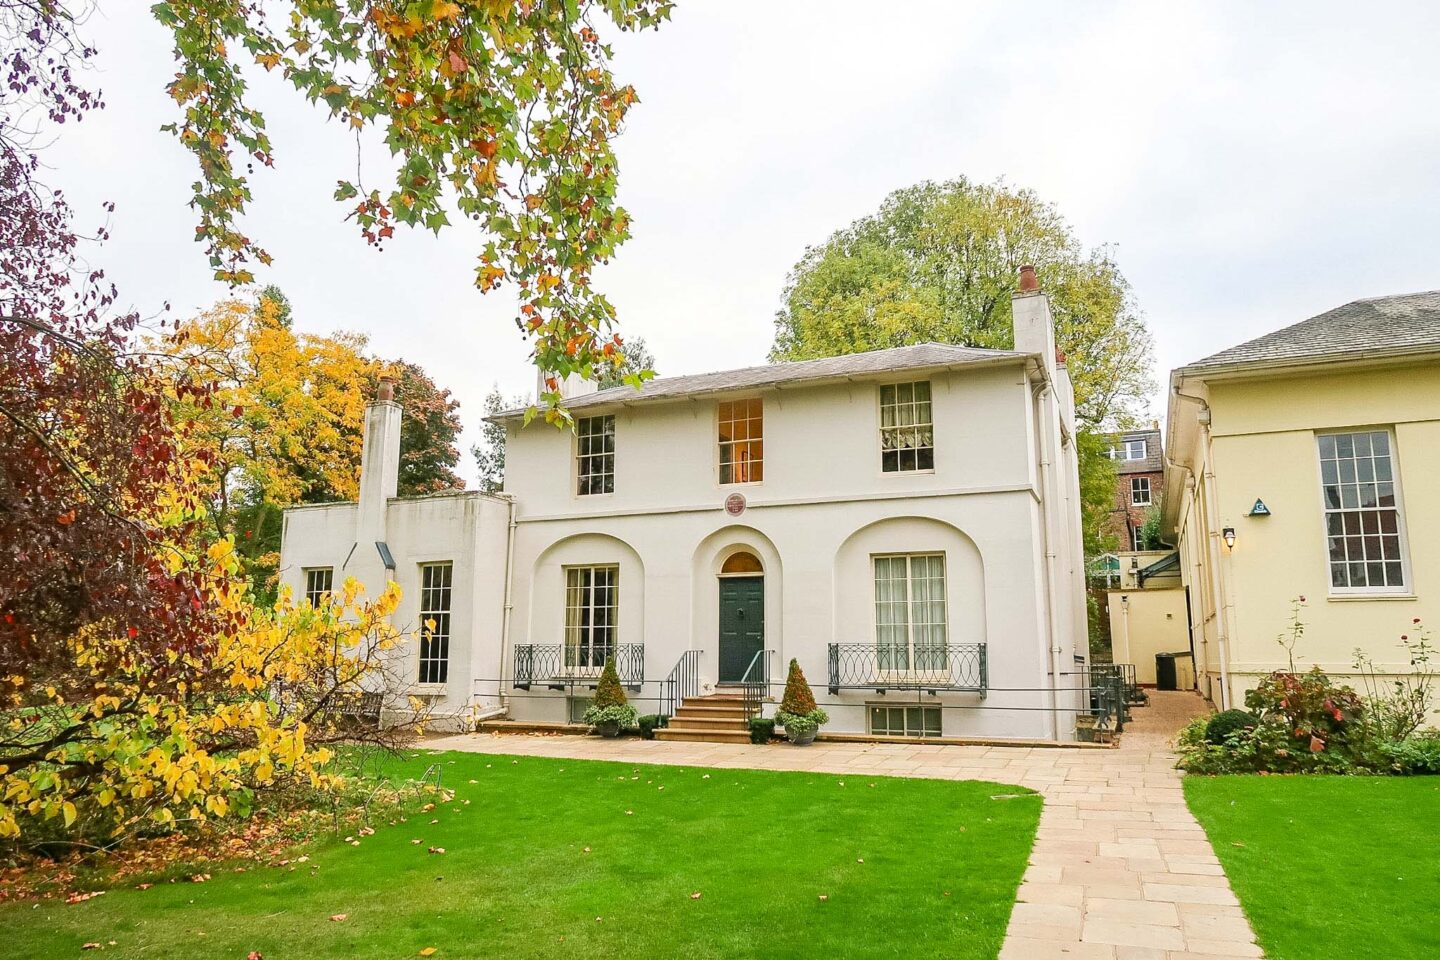 Things to do in Hampstead, Keats House Museum from front